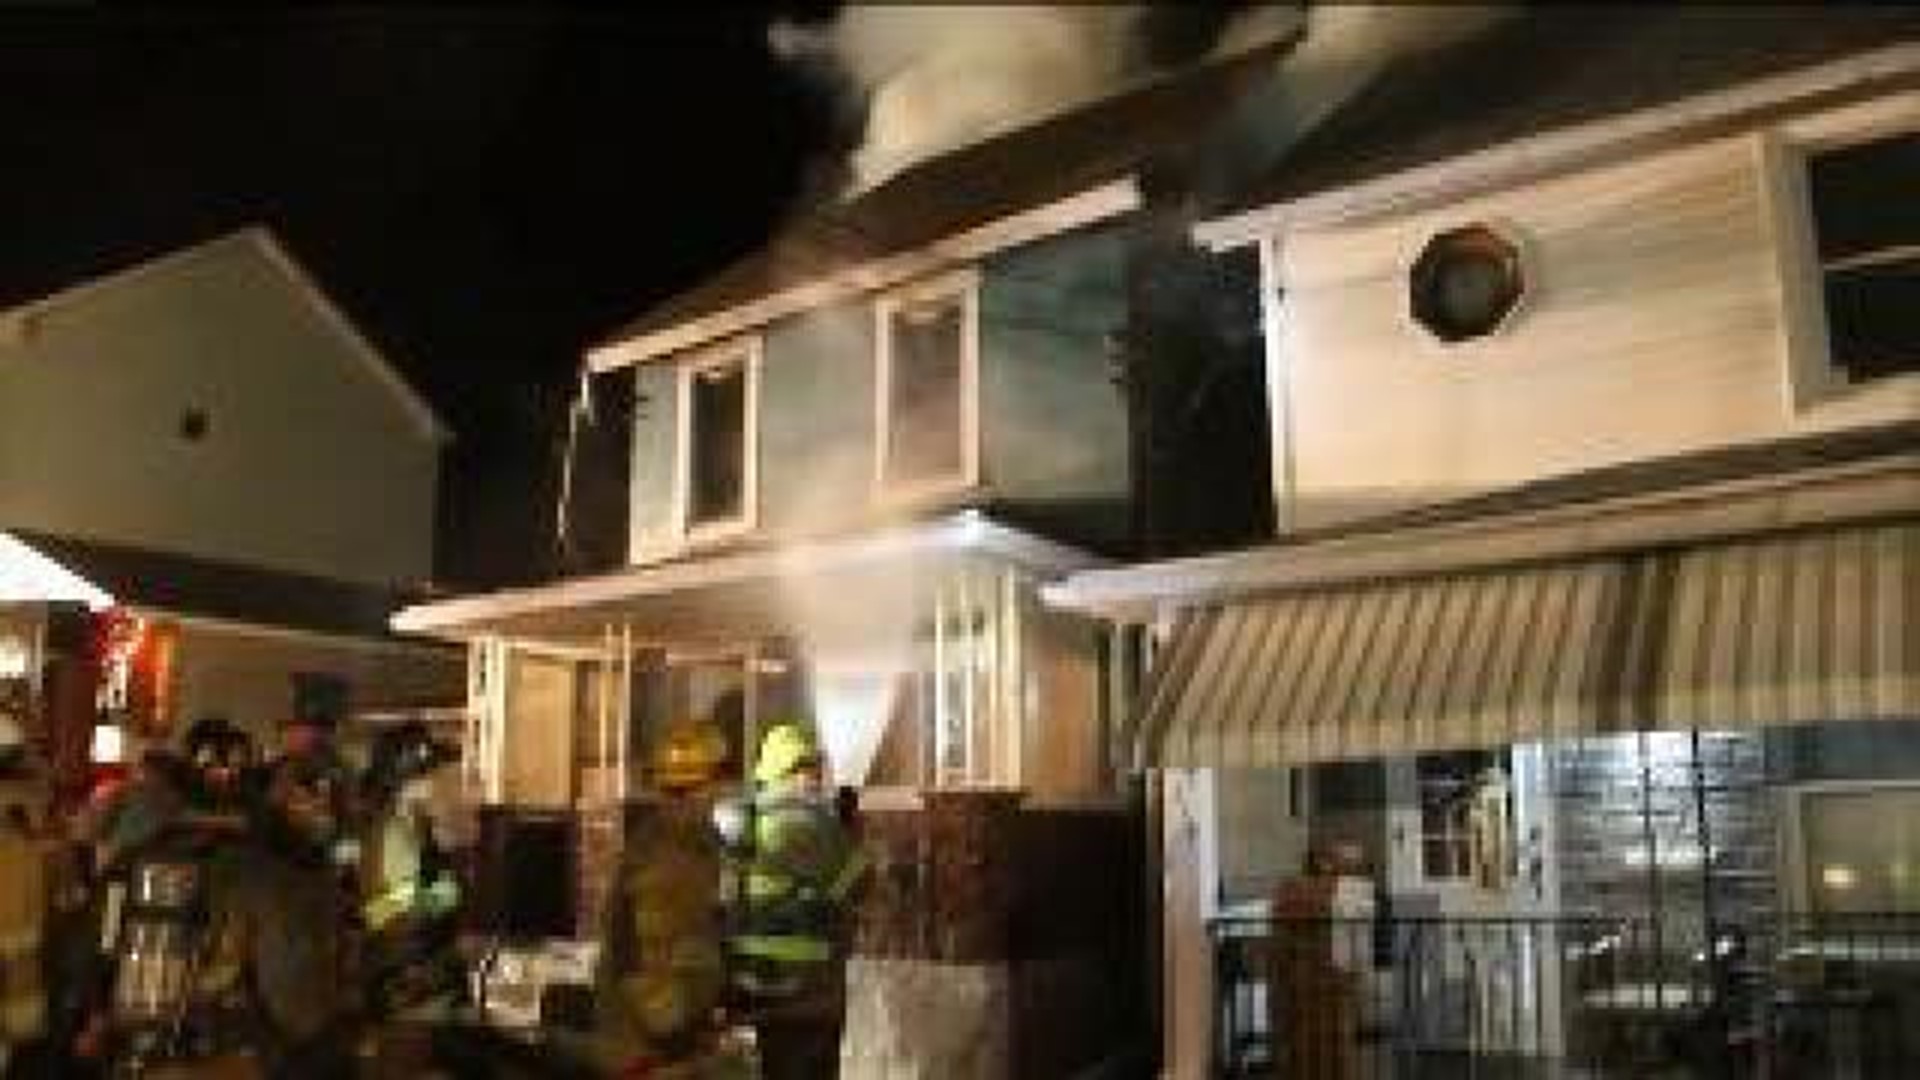 Firefighters Battle Early Morning Flames